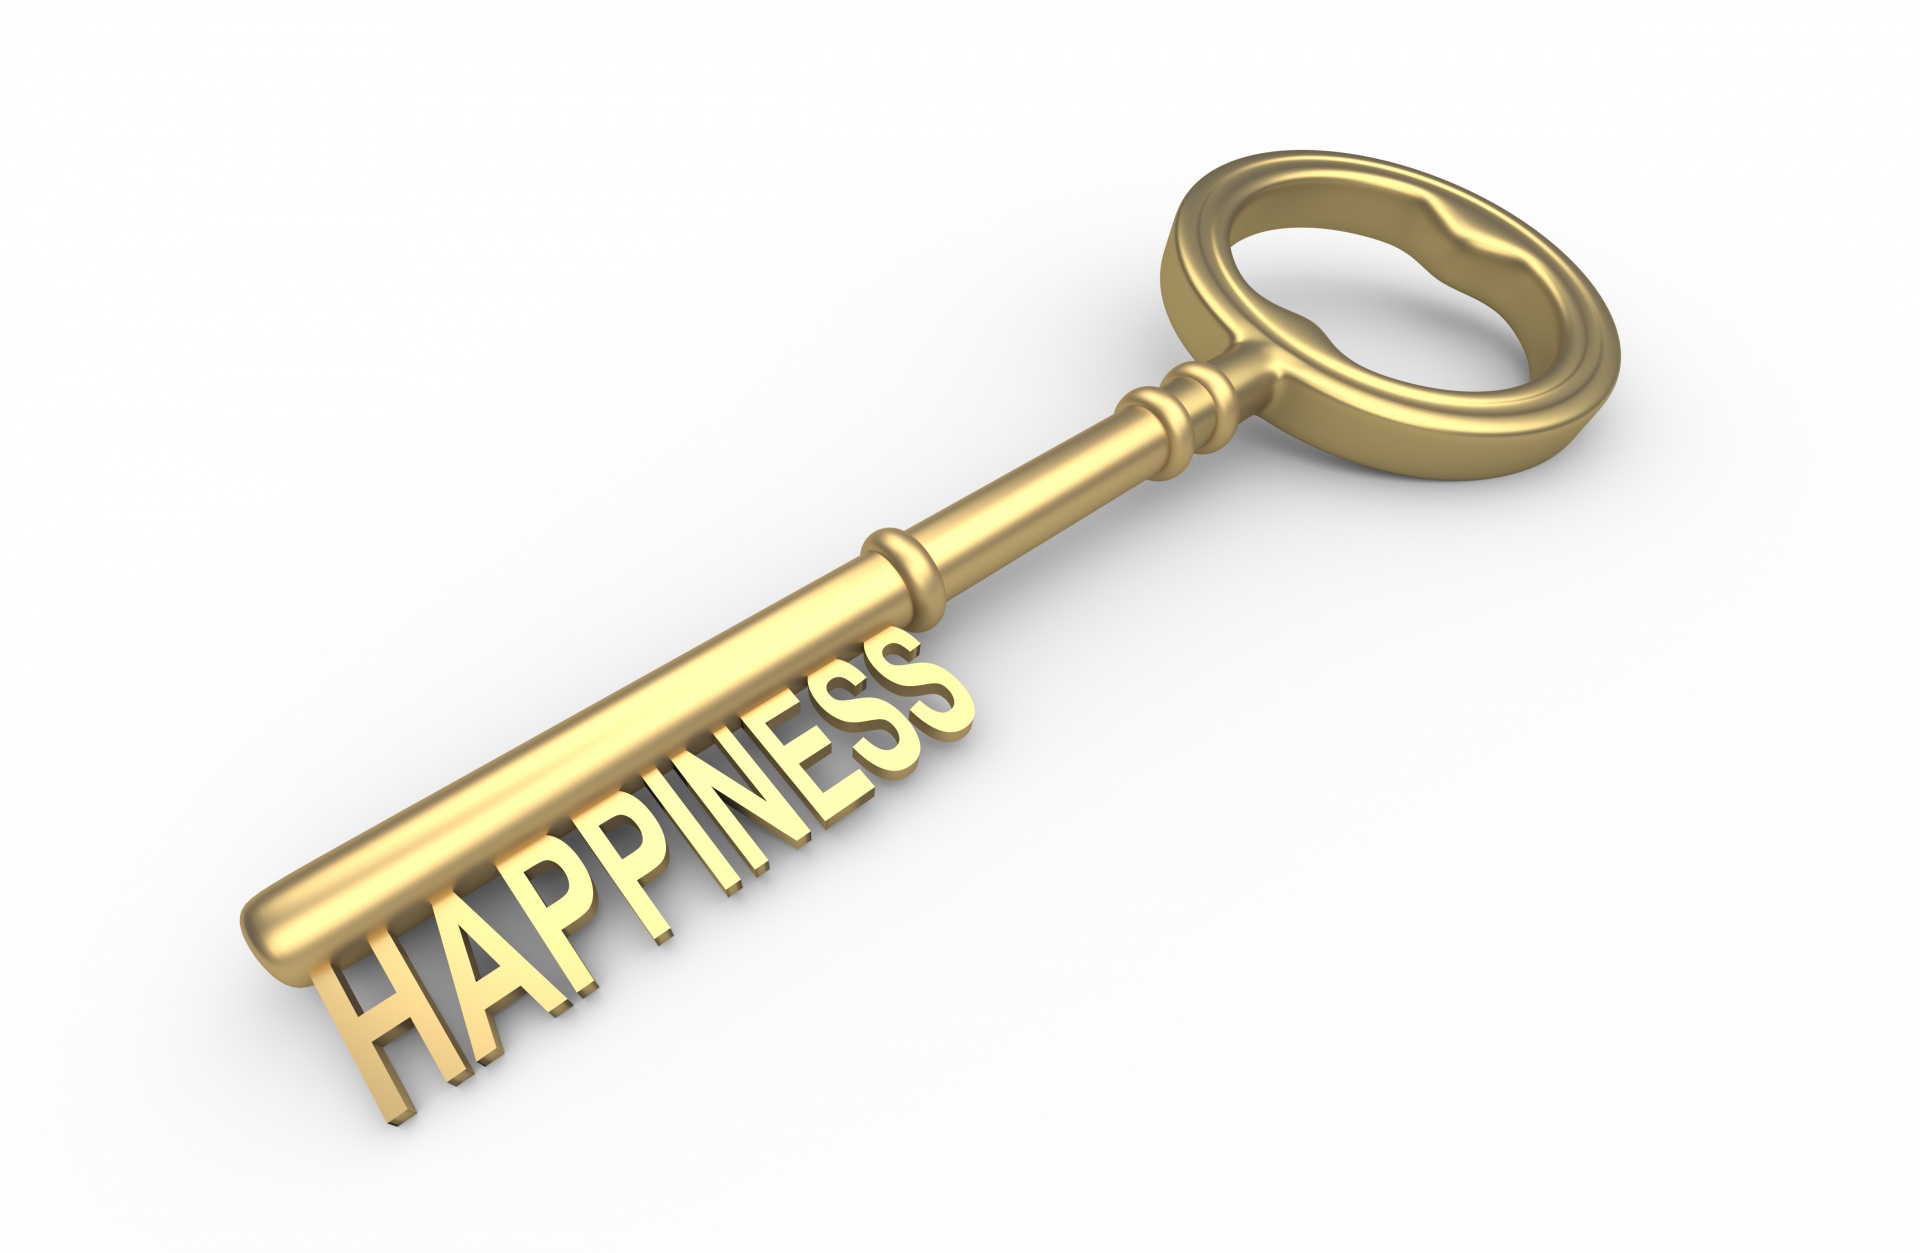 key to happiness